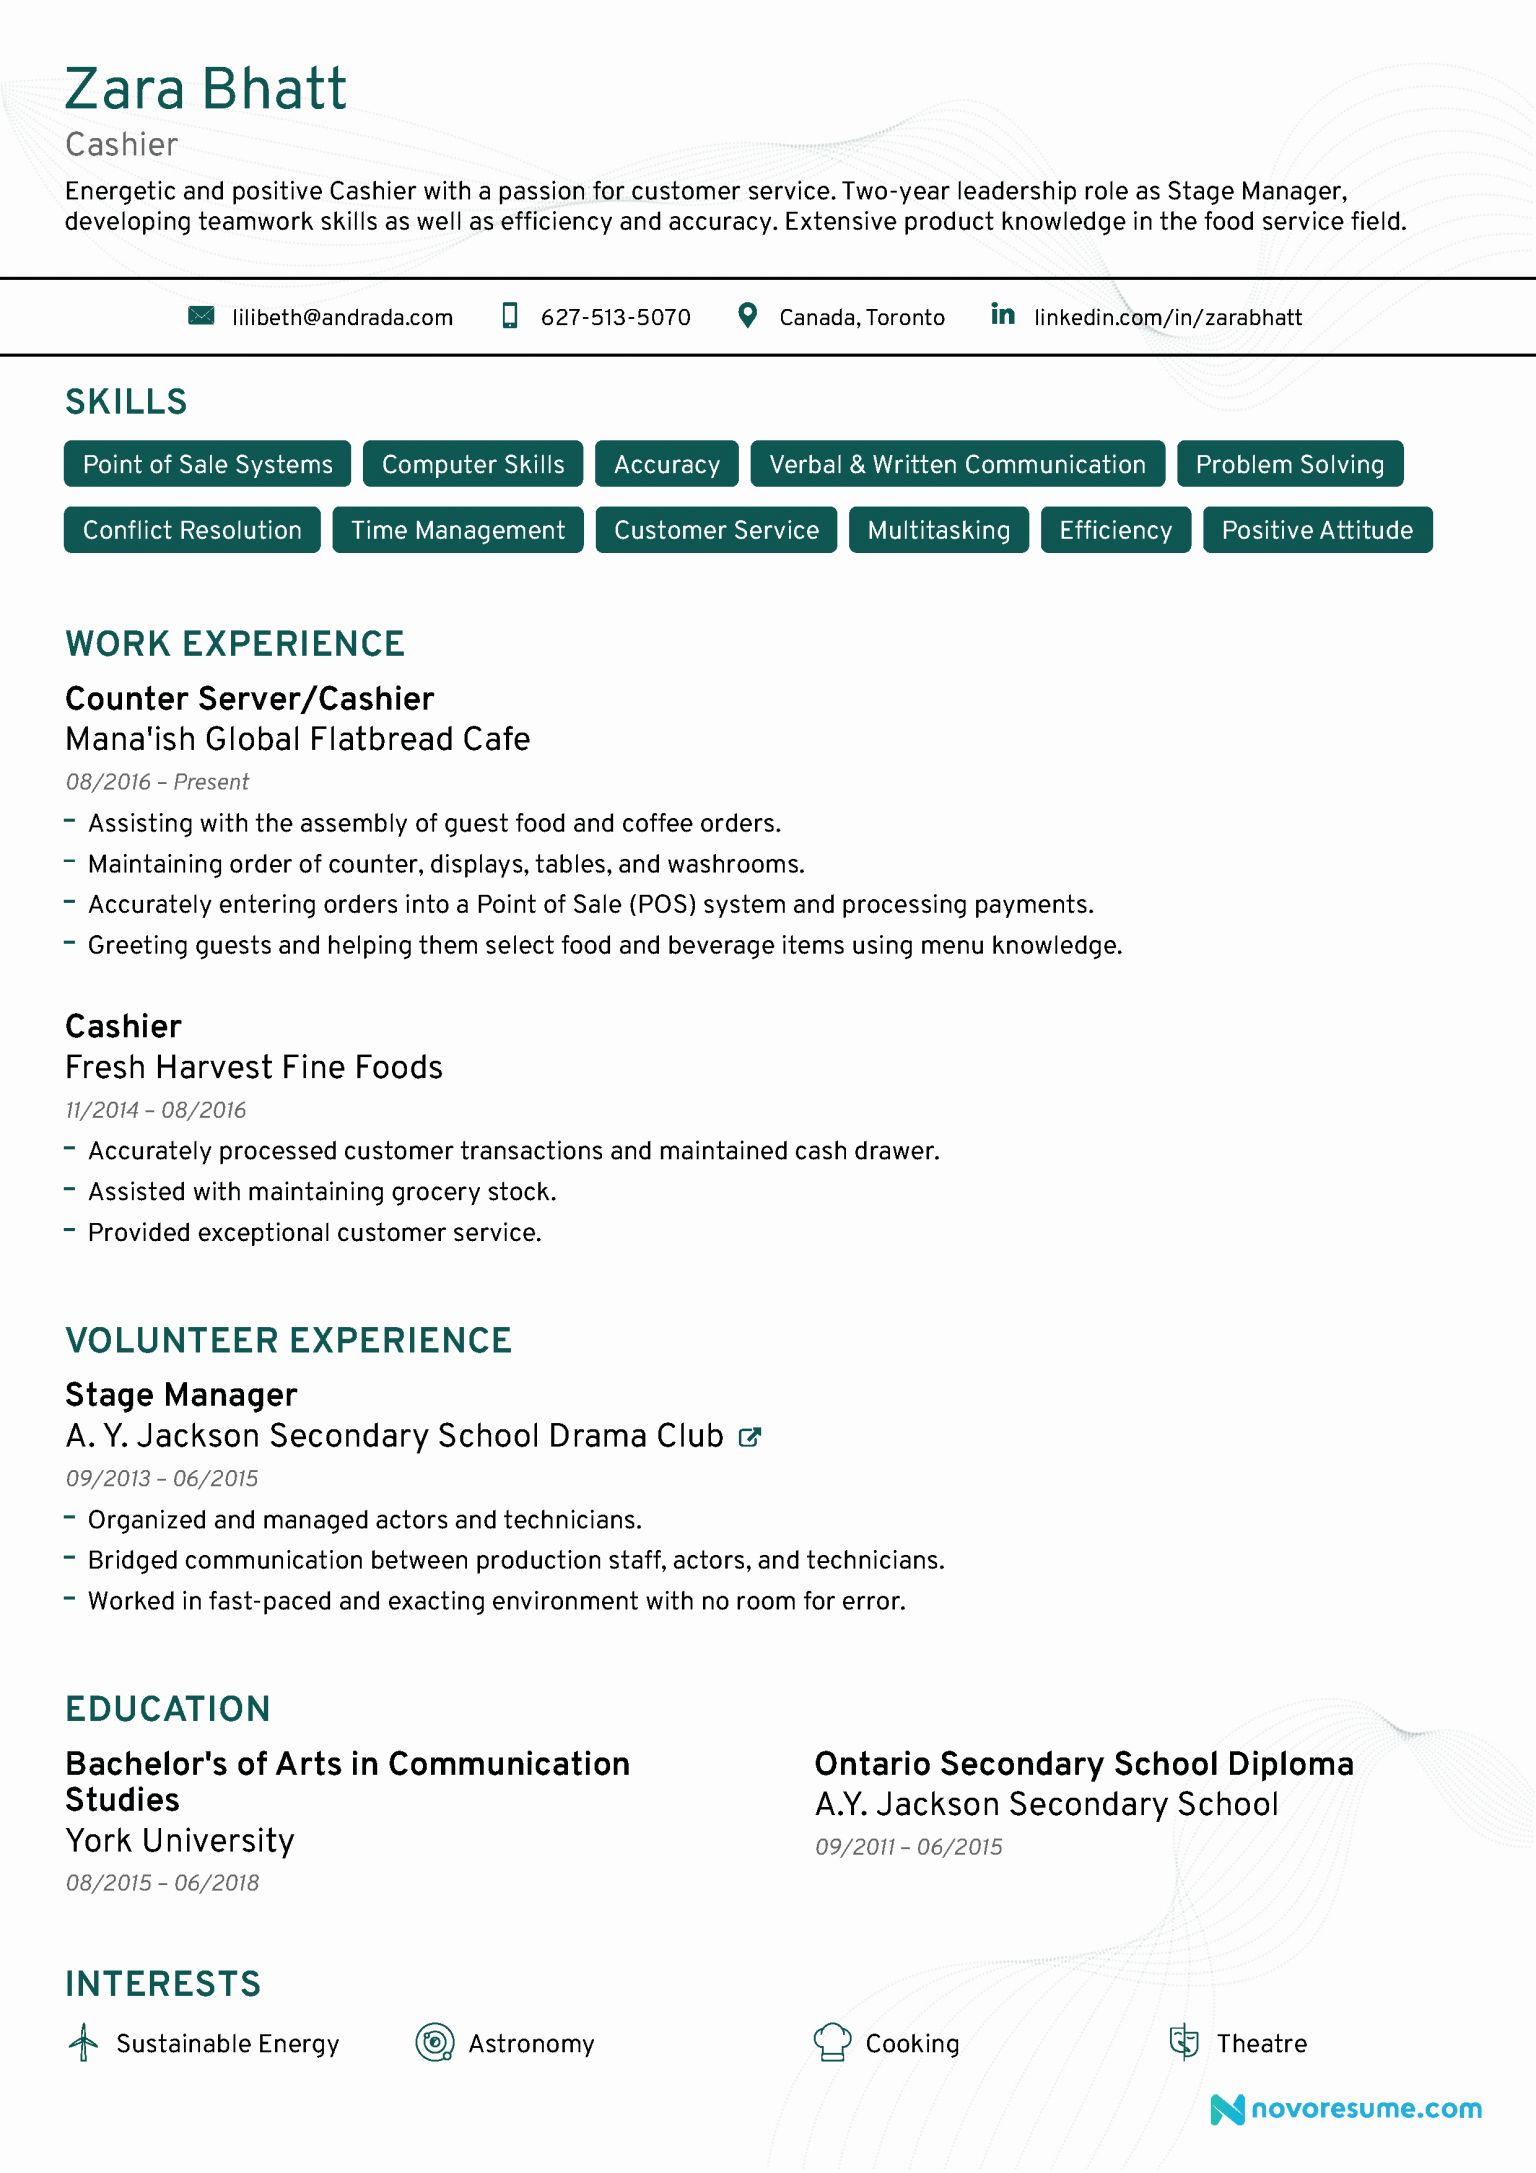 resume-example-for-cashier-letter-example-template